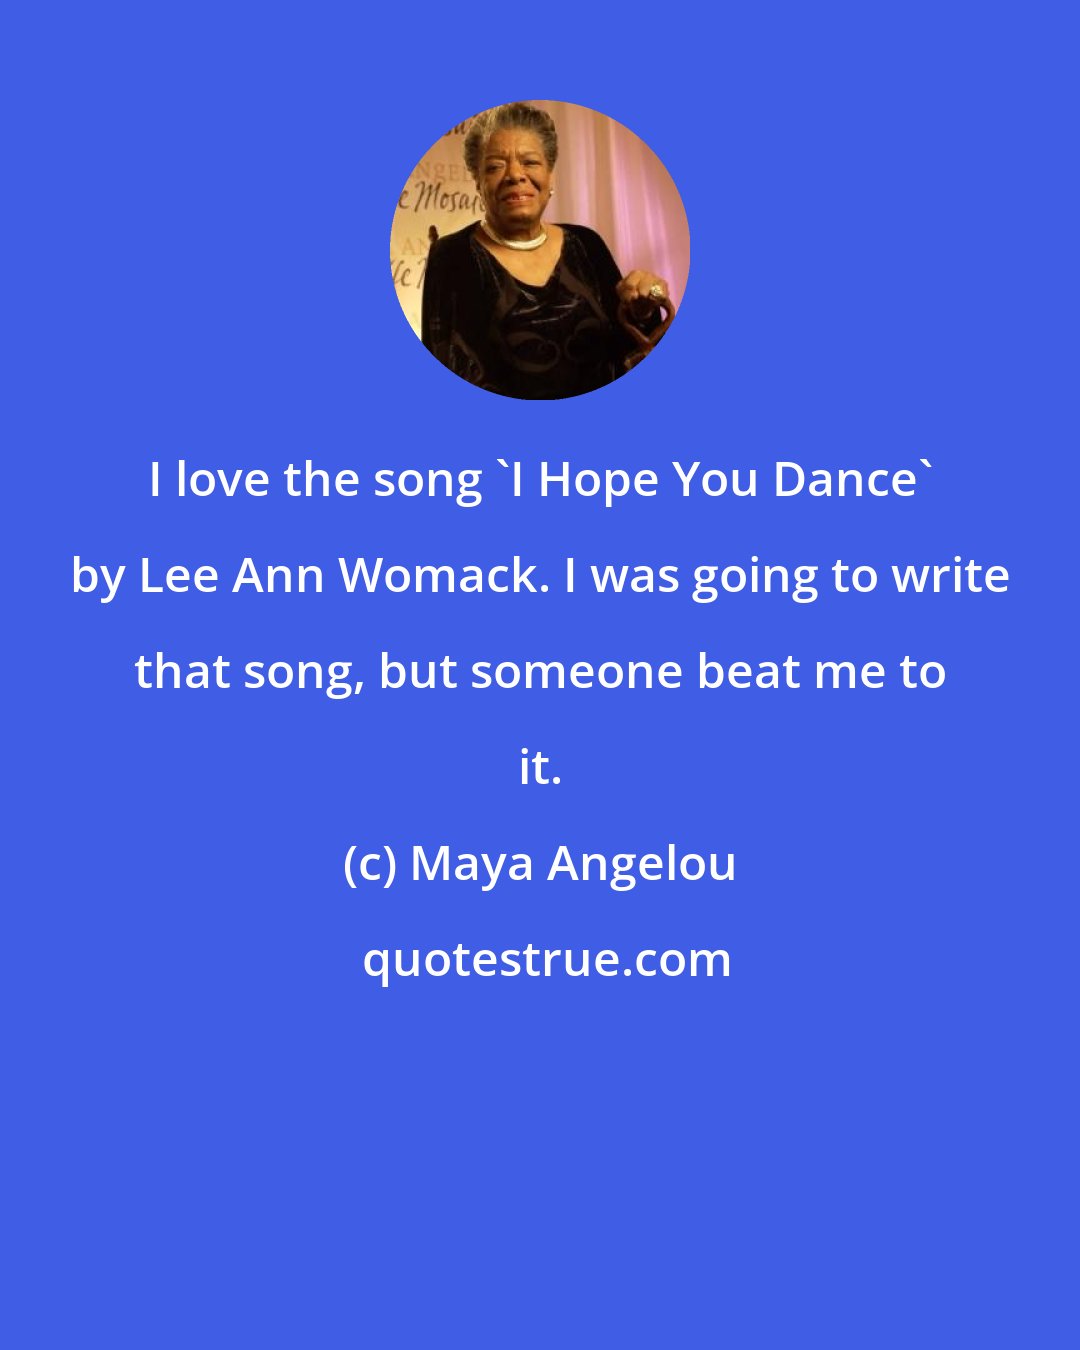 Maya Angelou: I love the song 'I Hope You Dance' by Lee Ann Womack. I was going to write that song, but someone beat me to it.